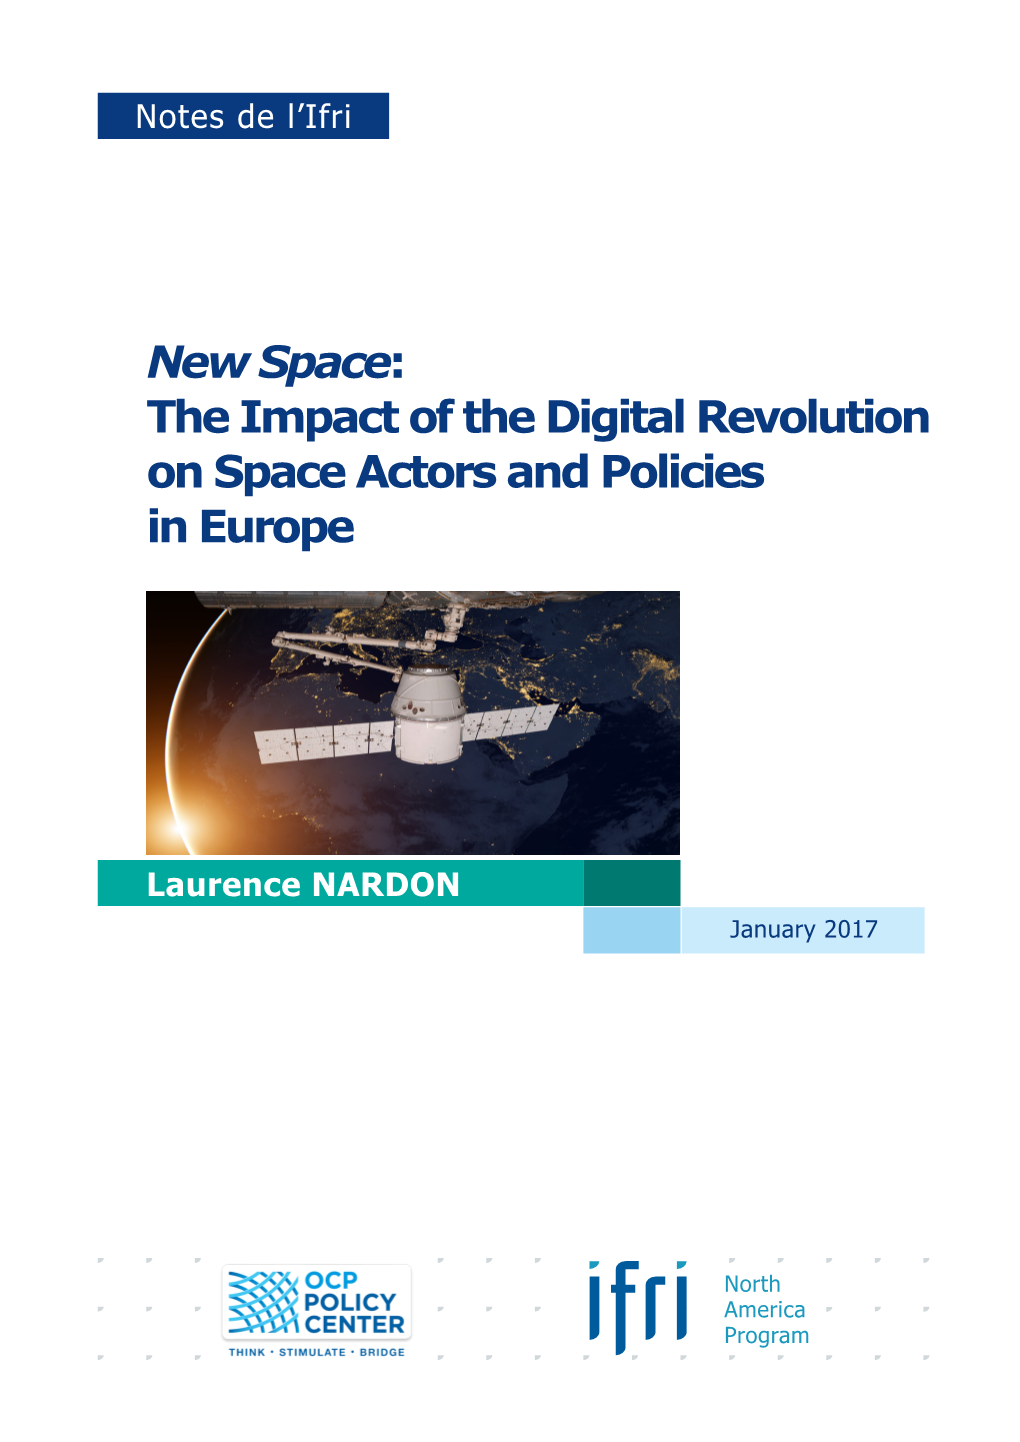 New Space: the Impact of the Digital Revolution on Space Actors and Policies in Europe